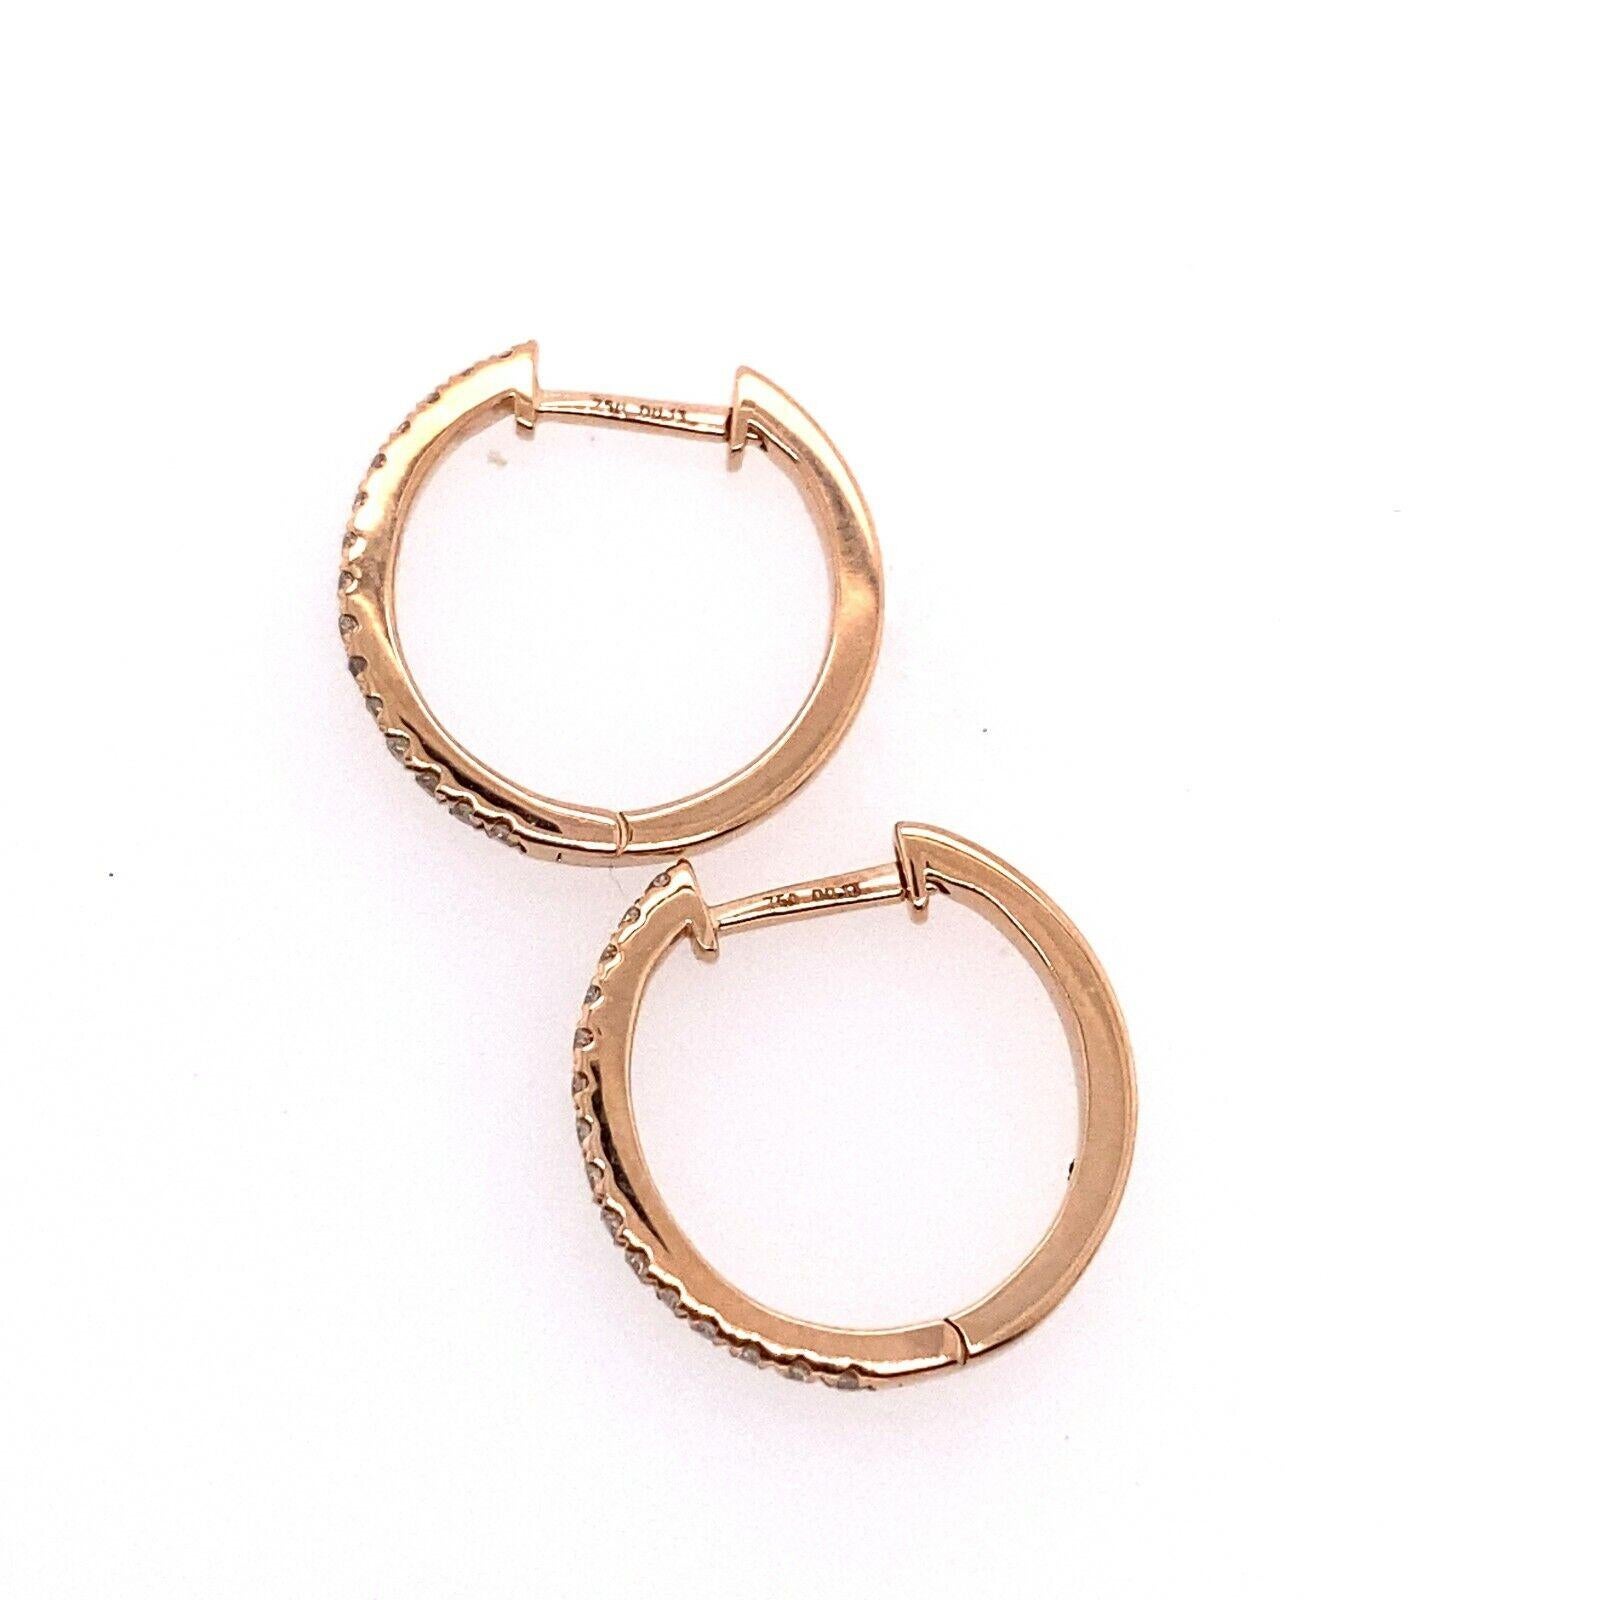 18ct Rose Gold Diamond Hoop Earrings, Set With 0.13ct Of Round Diamonds,15mm

The earrings measure 15mm in diameter and are set with 0.13ct of round Diamonds. The earrings are a great choice for women who love to wear jewellery that is both classy